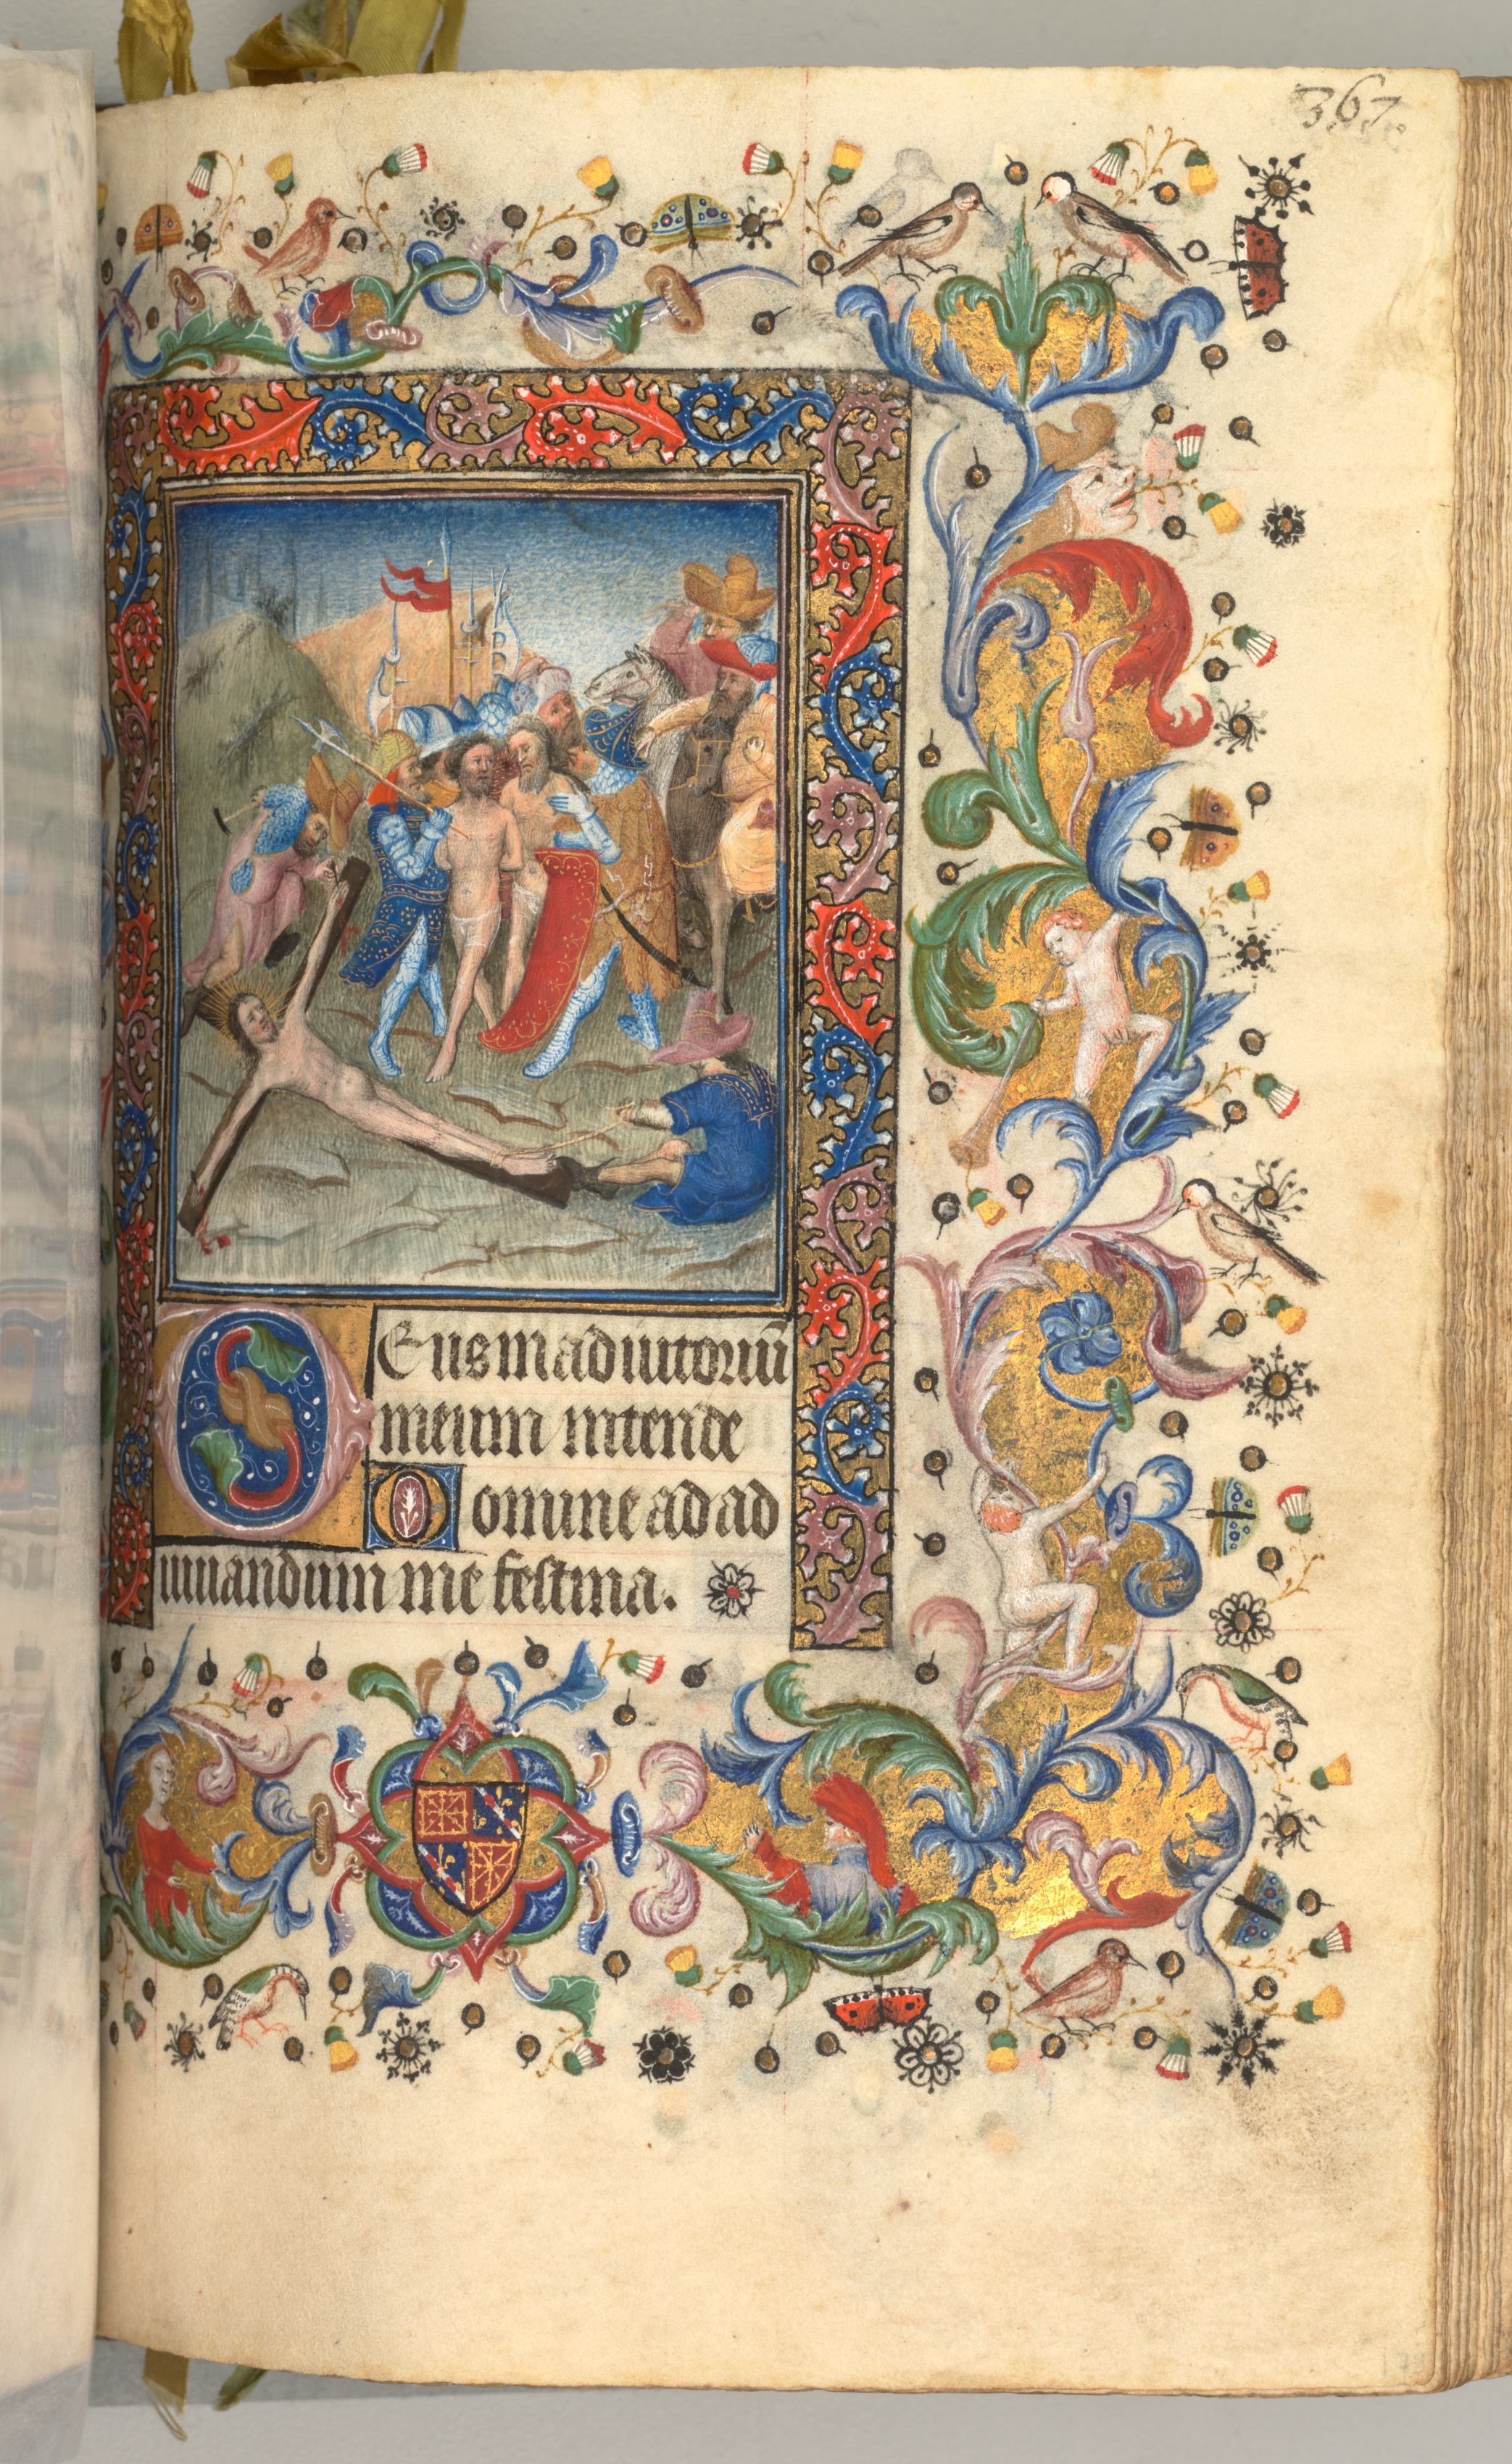 Hours of Charles the Noble, King of Navarre (1361-1425): fol. 179r, Christ Nailed to the Cross